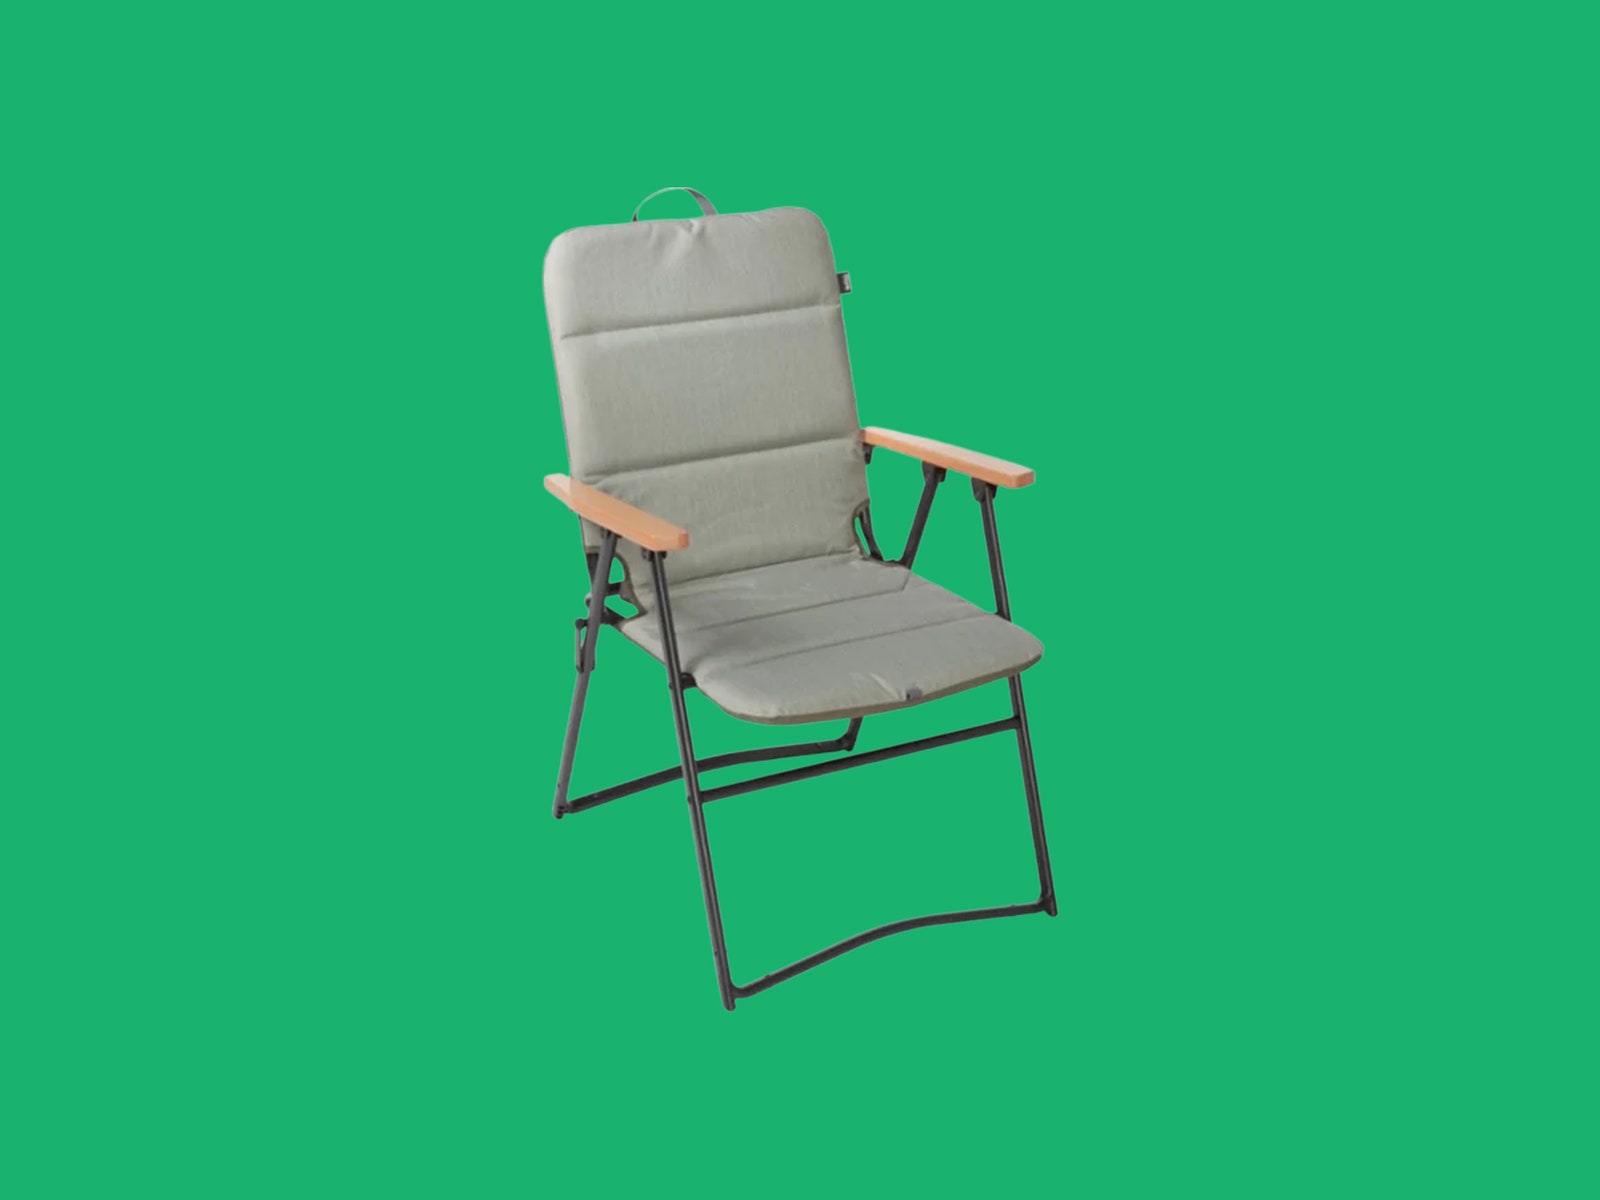 REI CoOp Outward Padded Lawn Chair